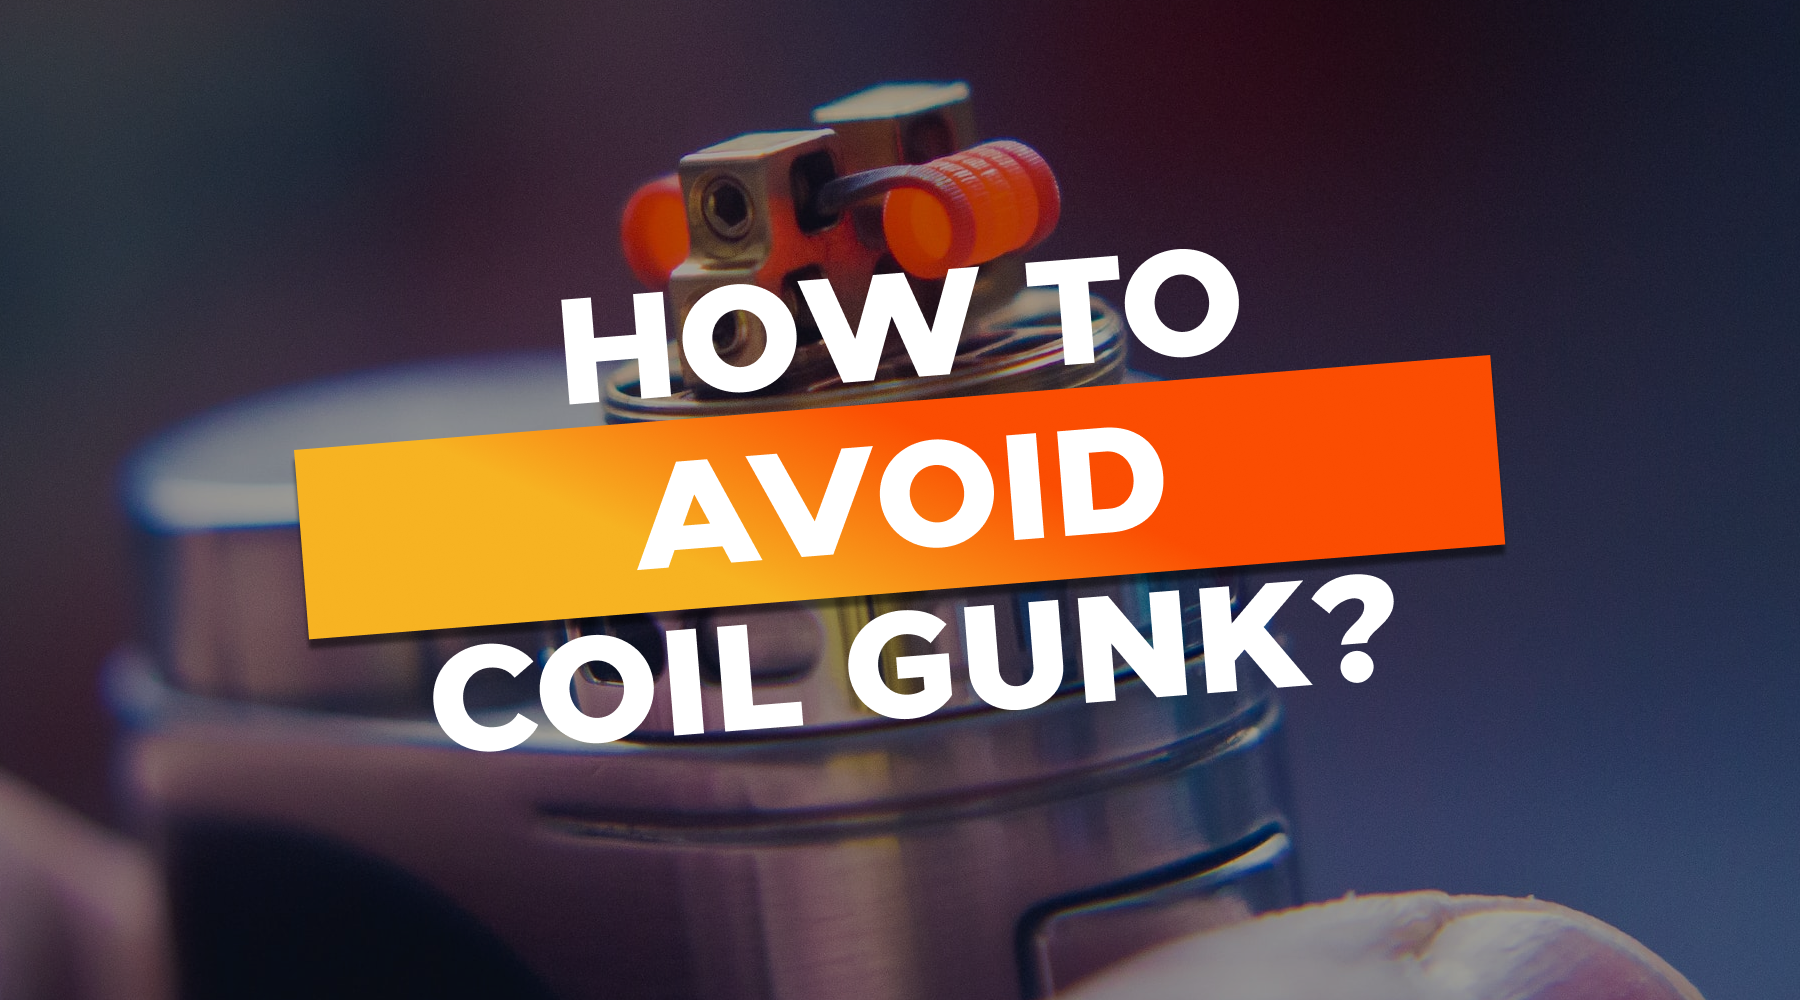 How To Avoid Coil Gunk